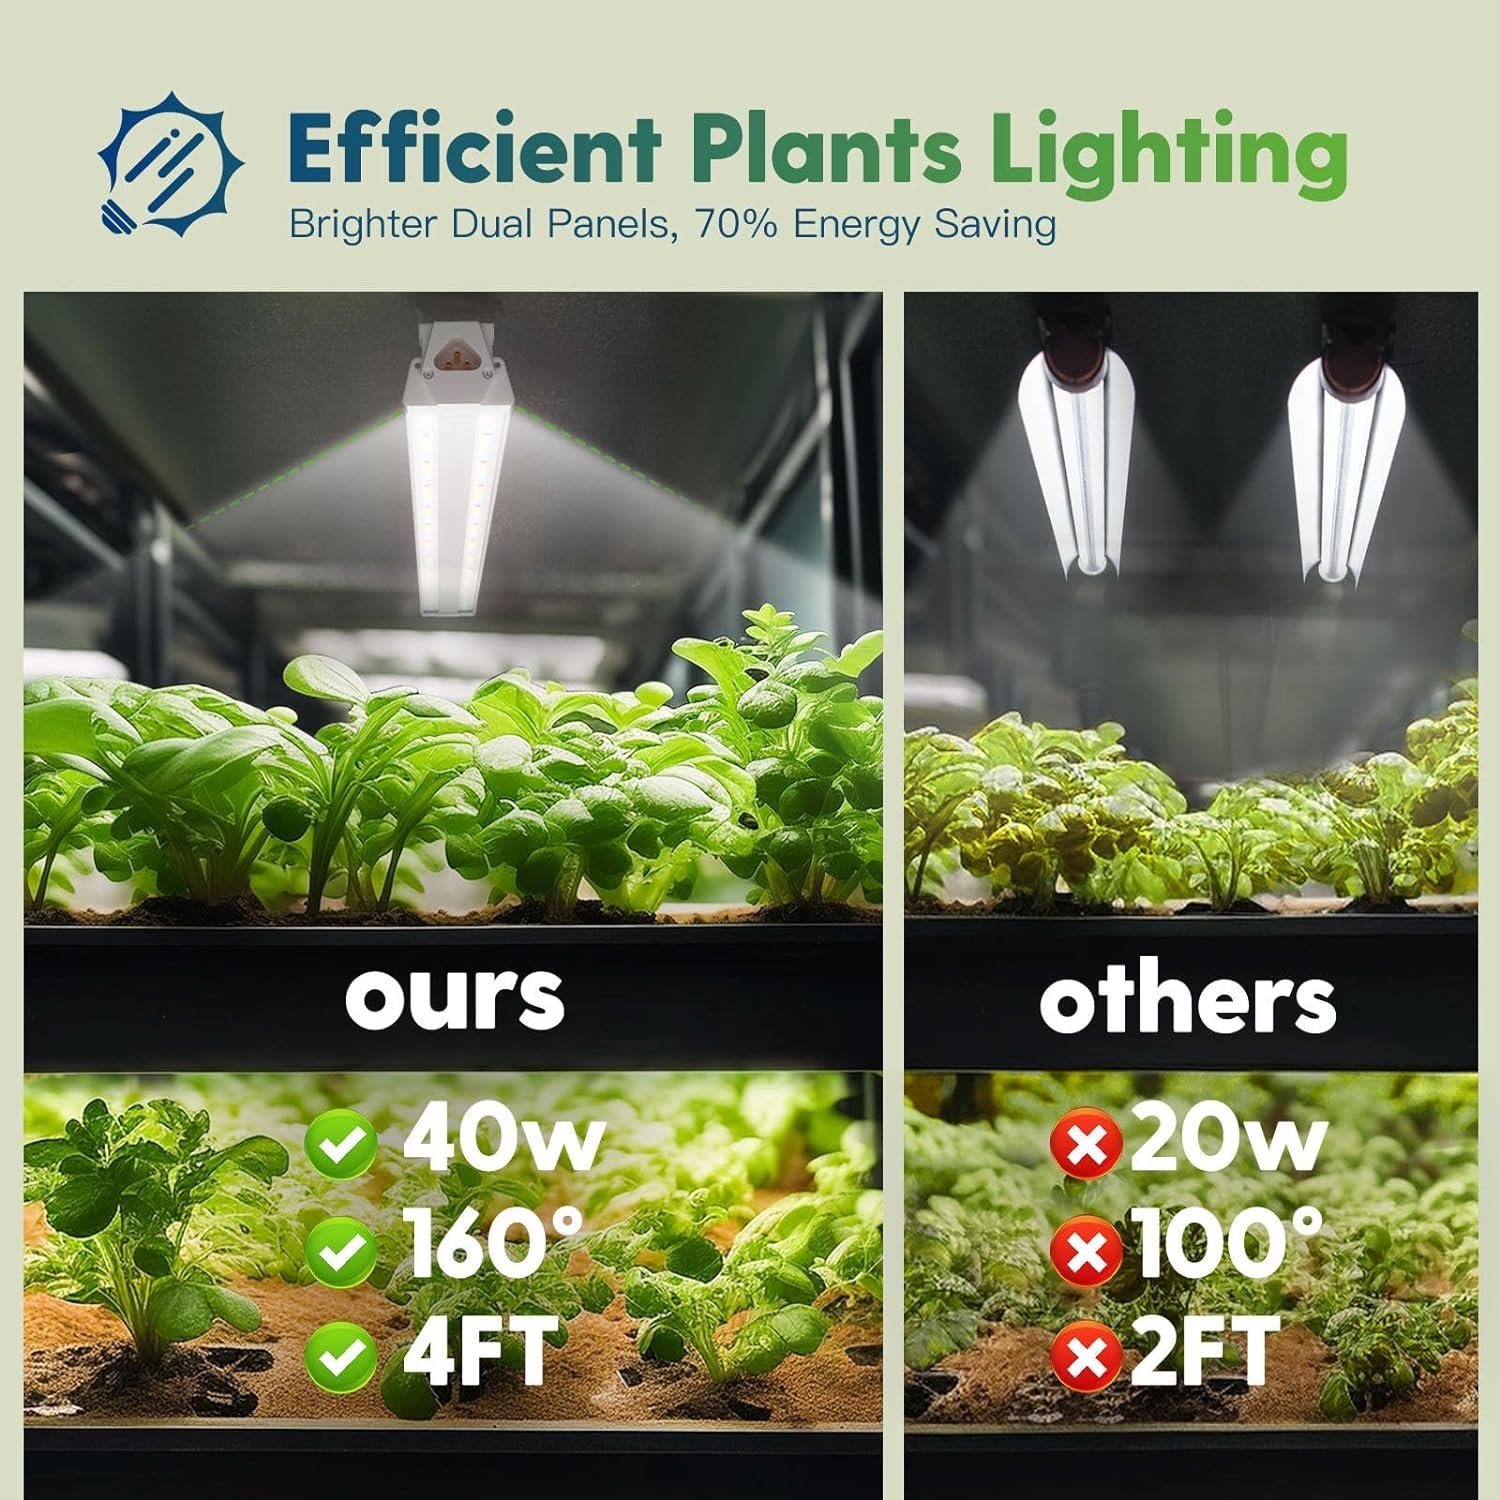 FREELICHT 1 Pack 4FT LED Grow Light, 40W (250W Equivalent), Full Spectrum Sunlight Growing Lamp Fixture, Linkable Hanging Plant Light for Hydroponic Indoor Plants Seeding, Plug-in with On/Off Switch